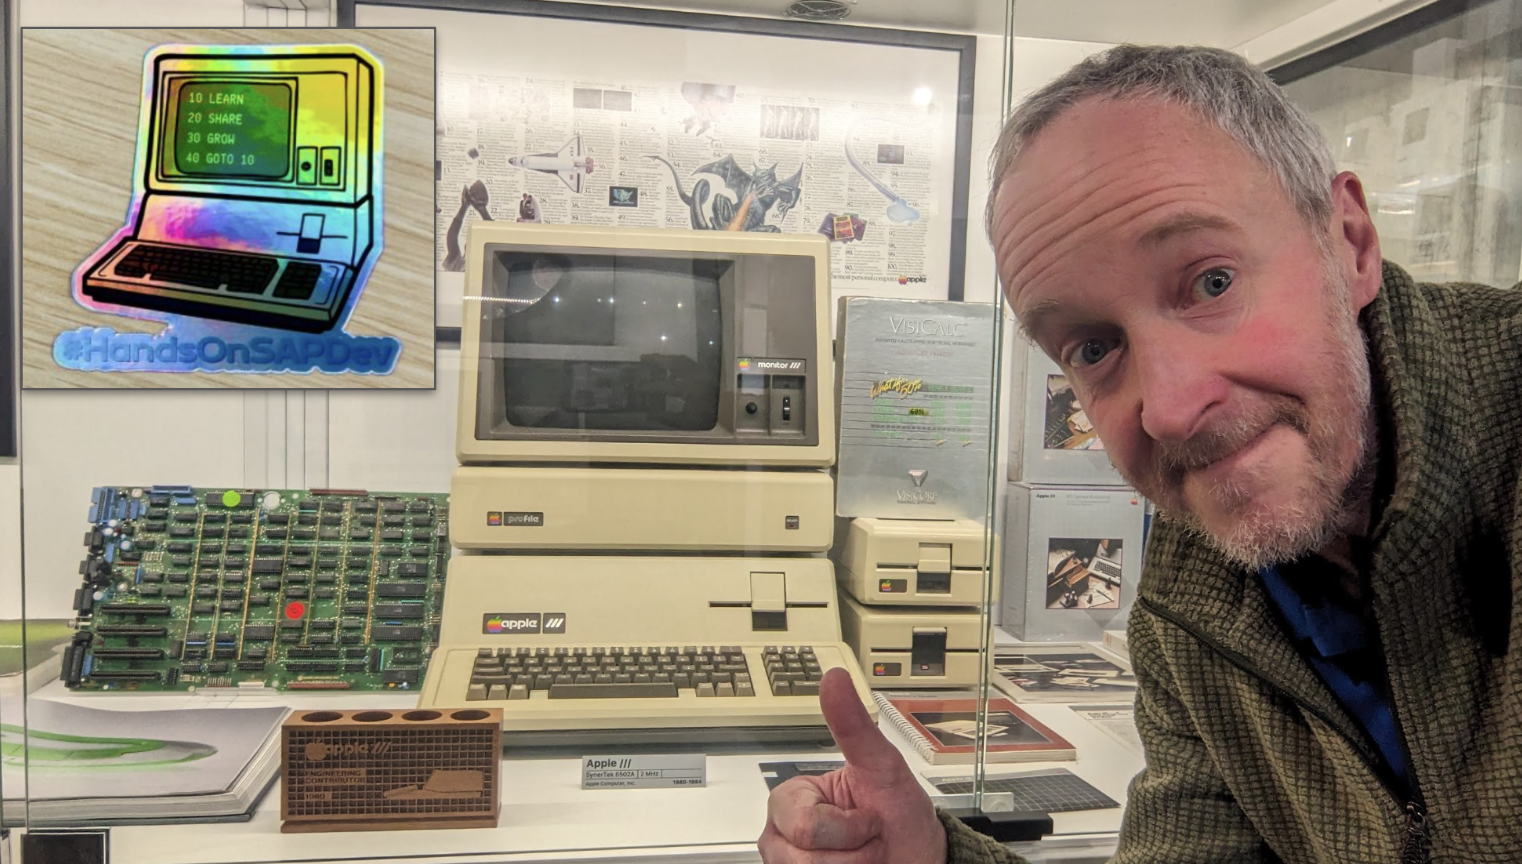 Apple III and a Hands-on SAP Dev sticker